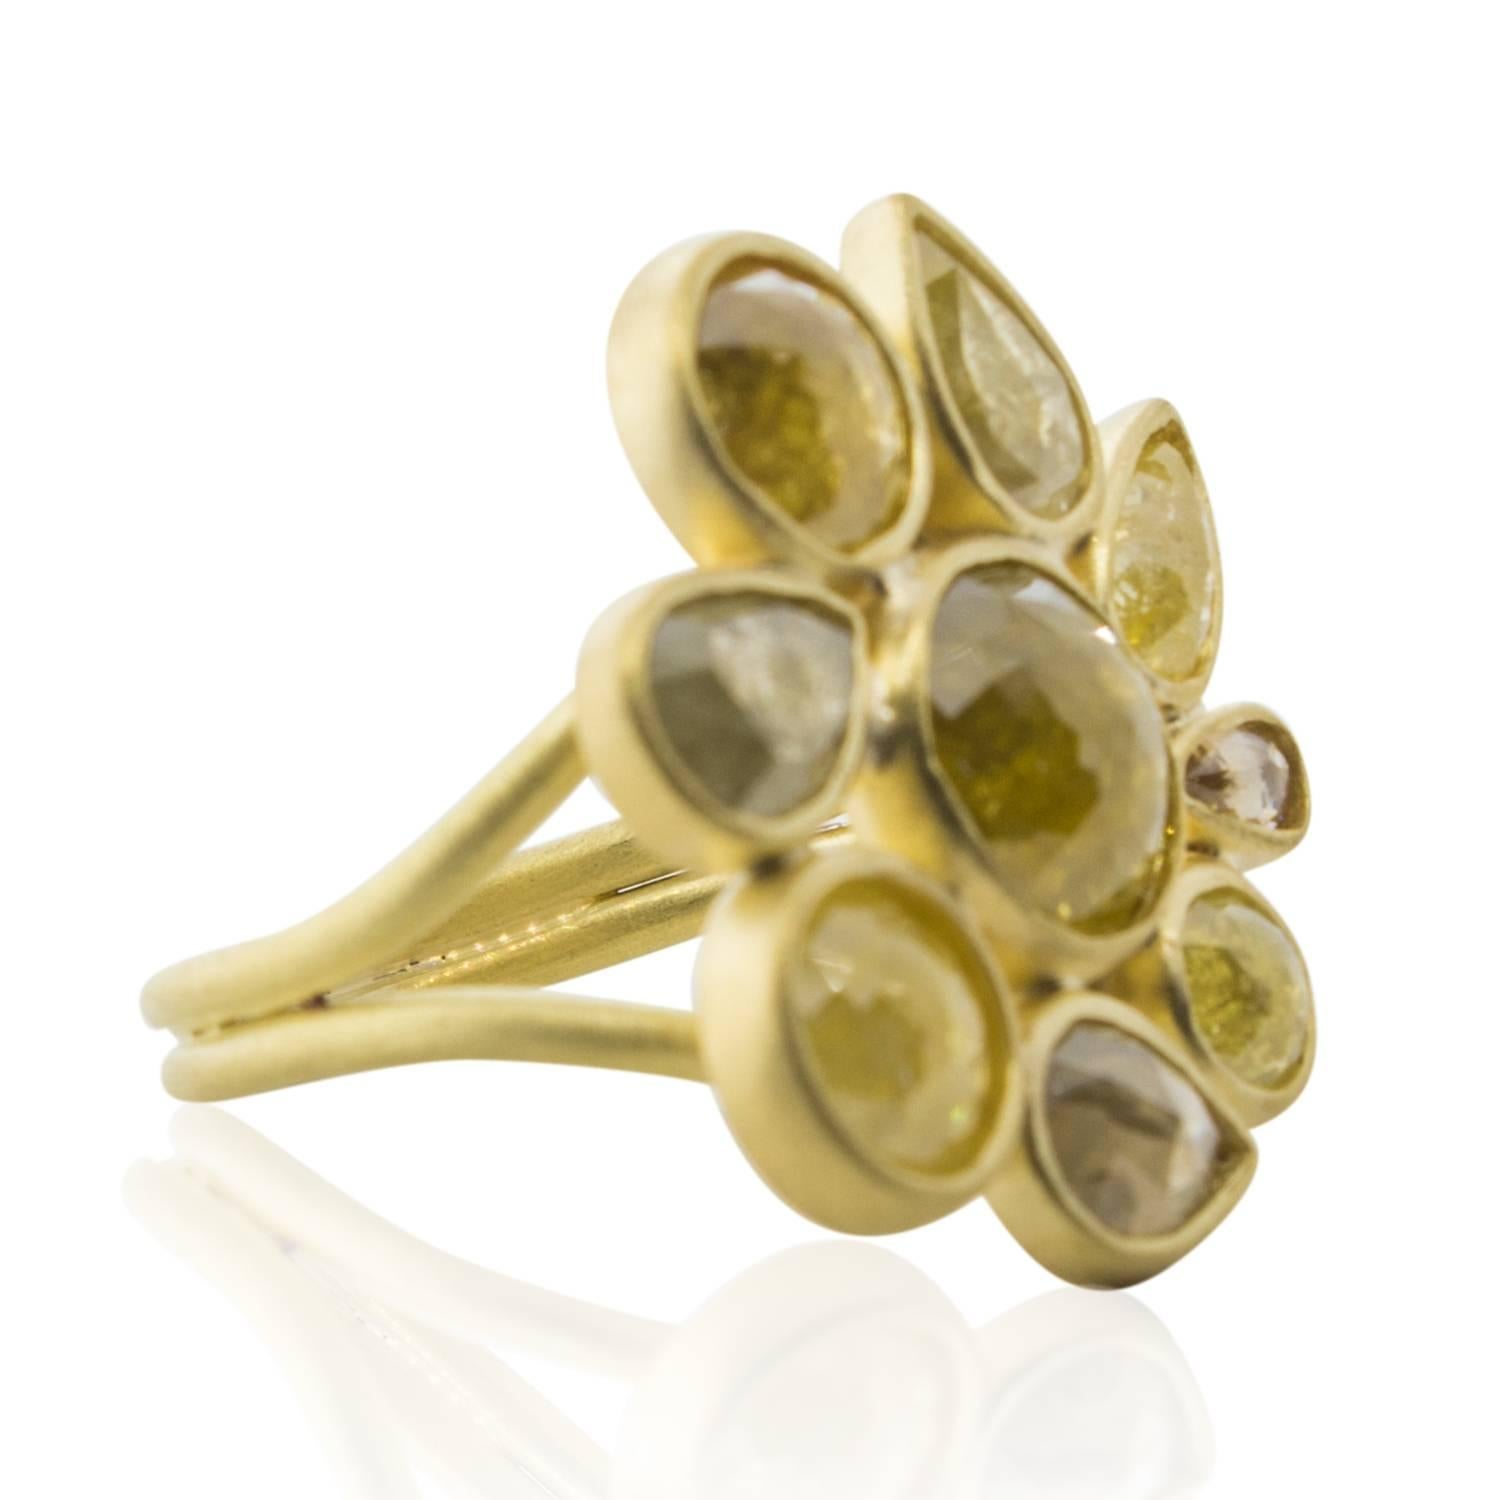 Handcrafted and unique, this one-of-a-kind ring is Faye Kim's version of the modern day cocktail ring.  This ring is an important statement piece that also offers a playful and casual style - the ultimate in understated elegance!  Each unique